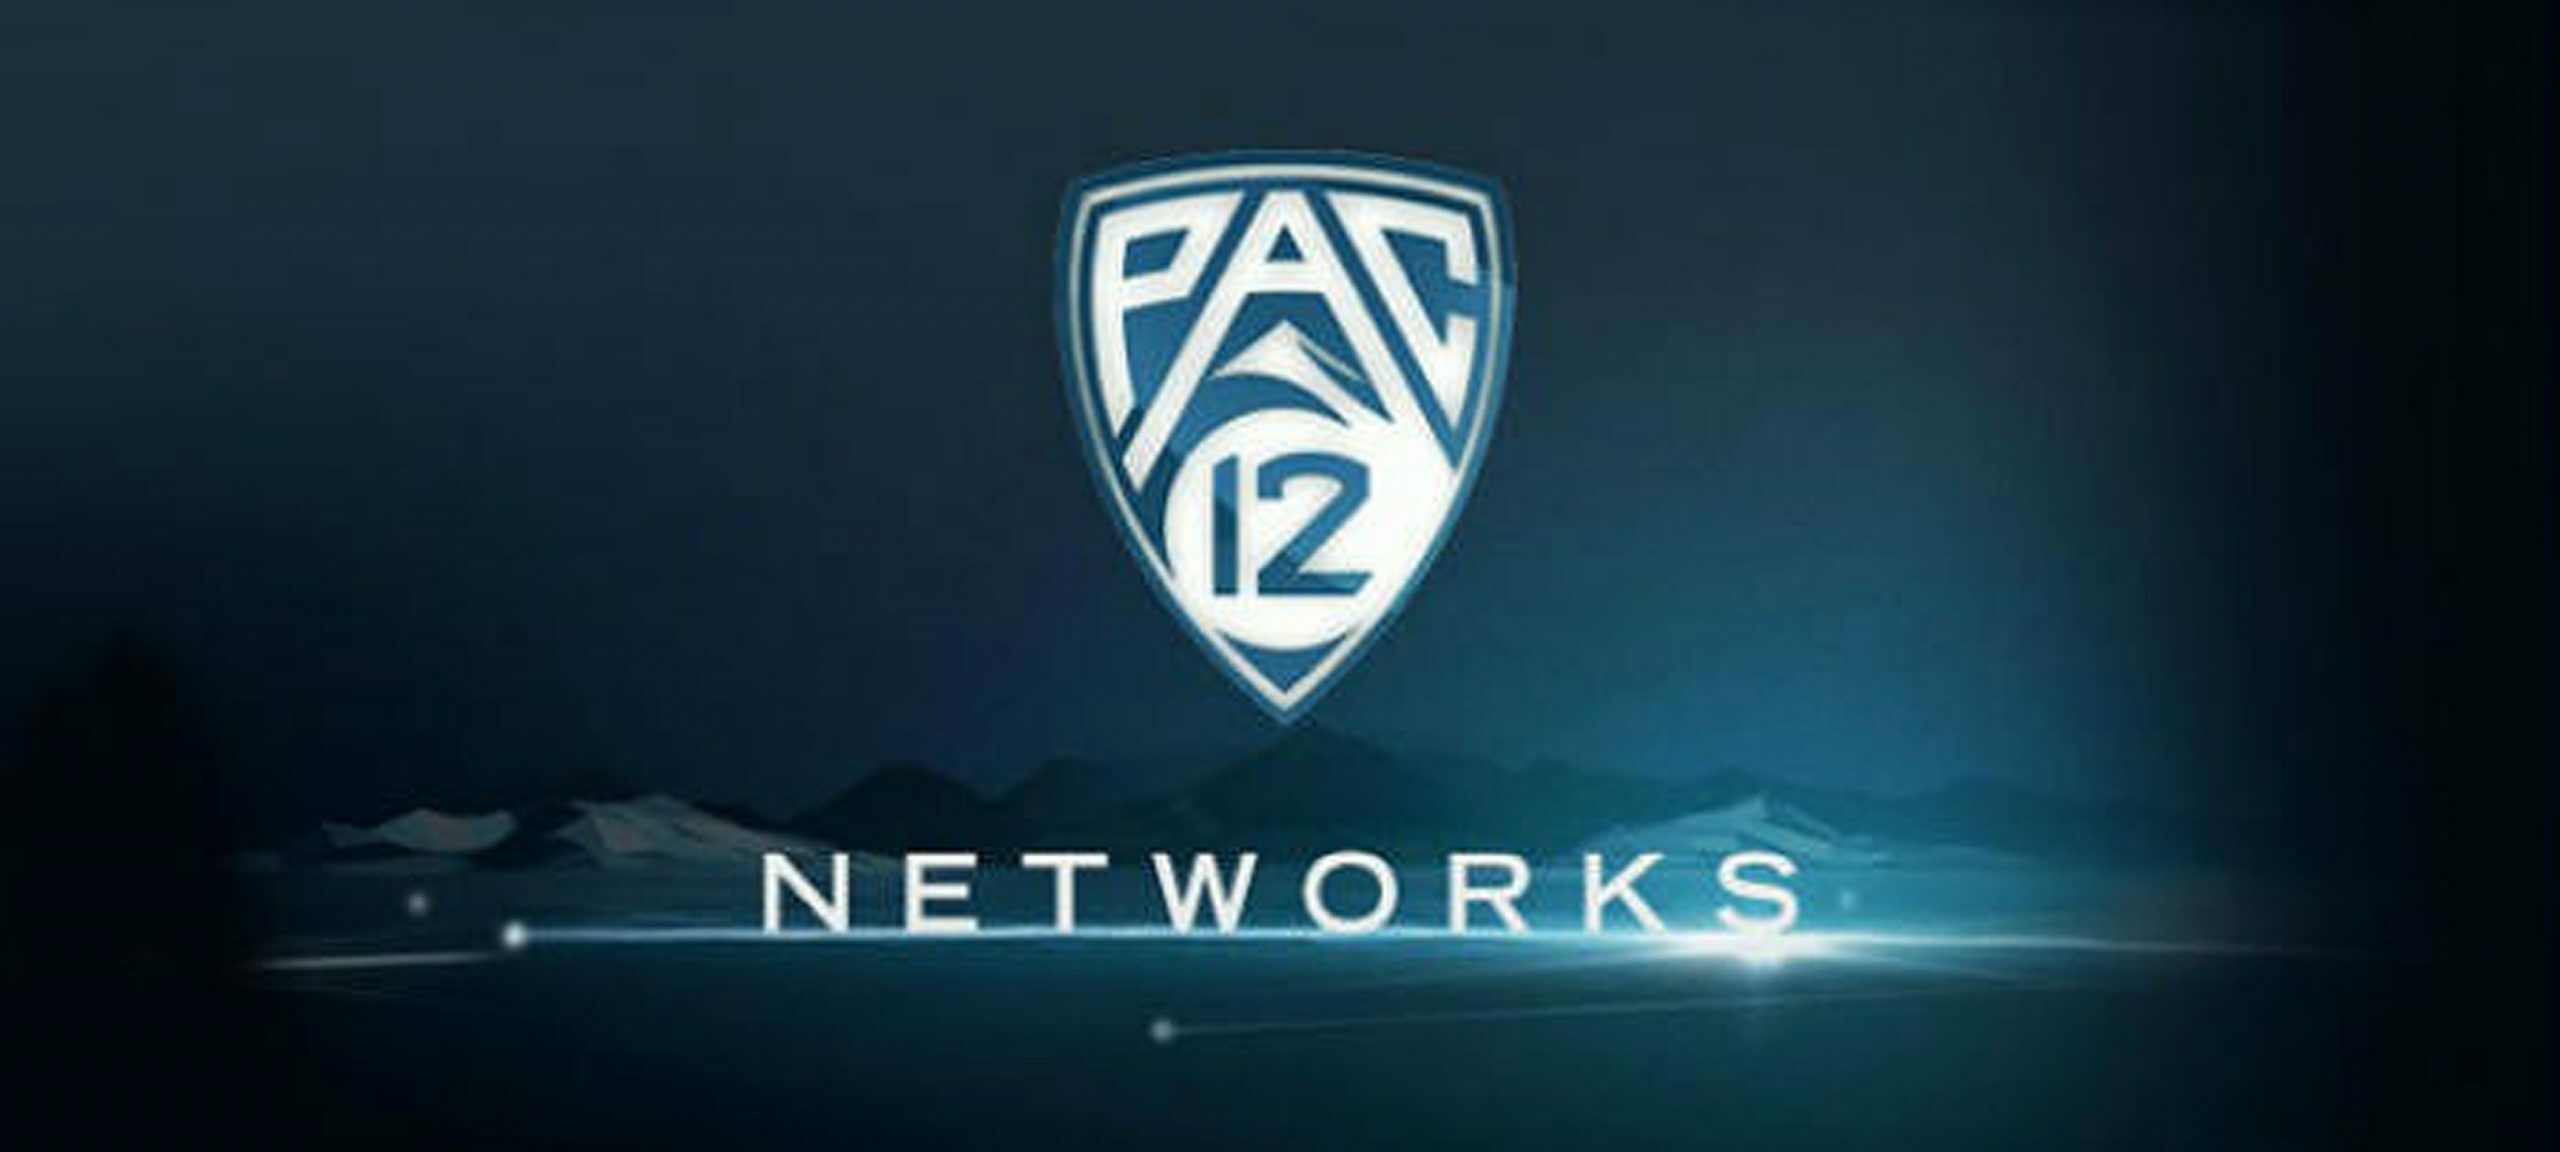 Pac-12 to Enhance Football Broadcasts With More Extensive Coverage